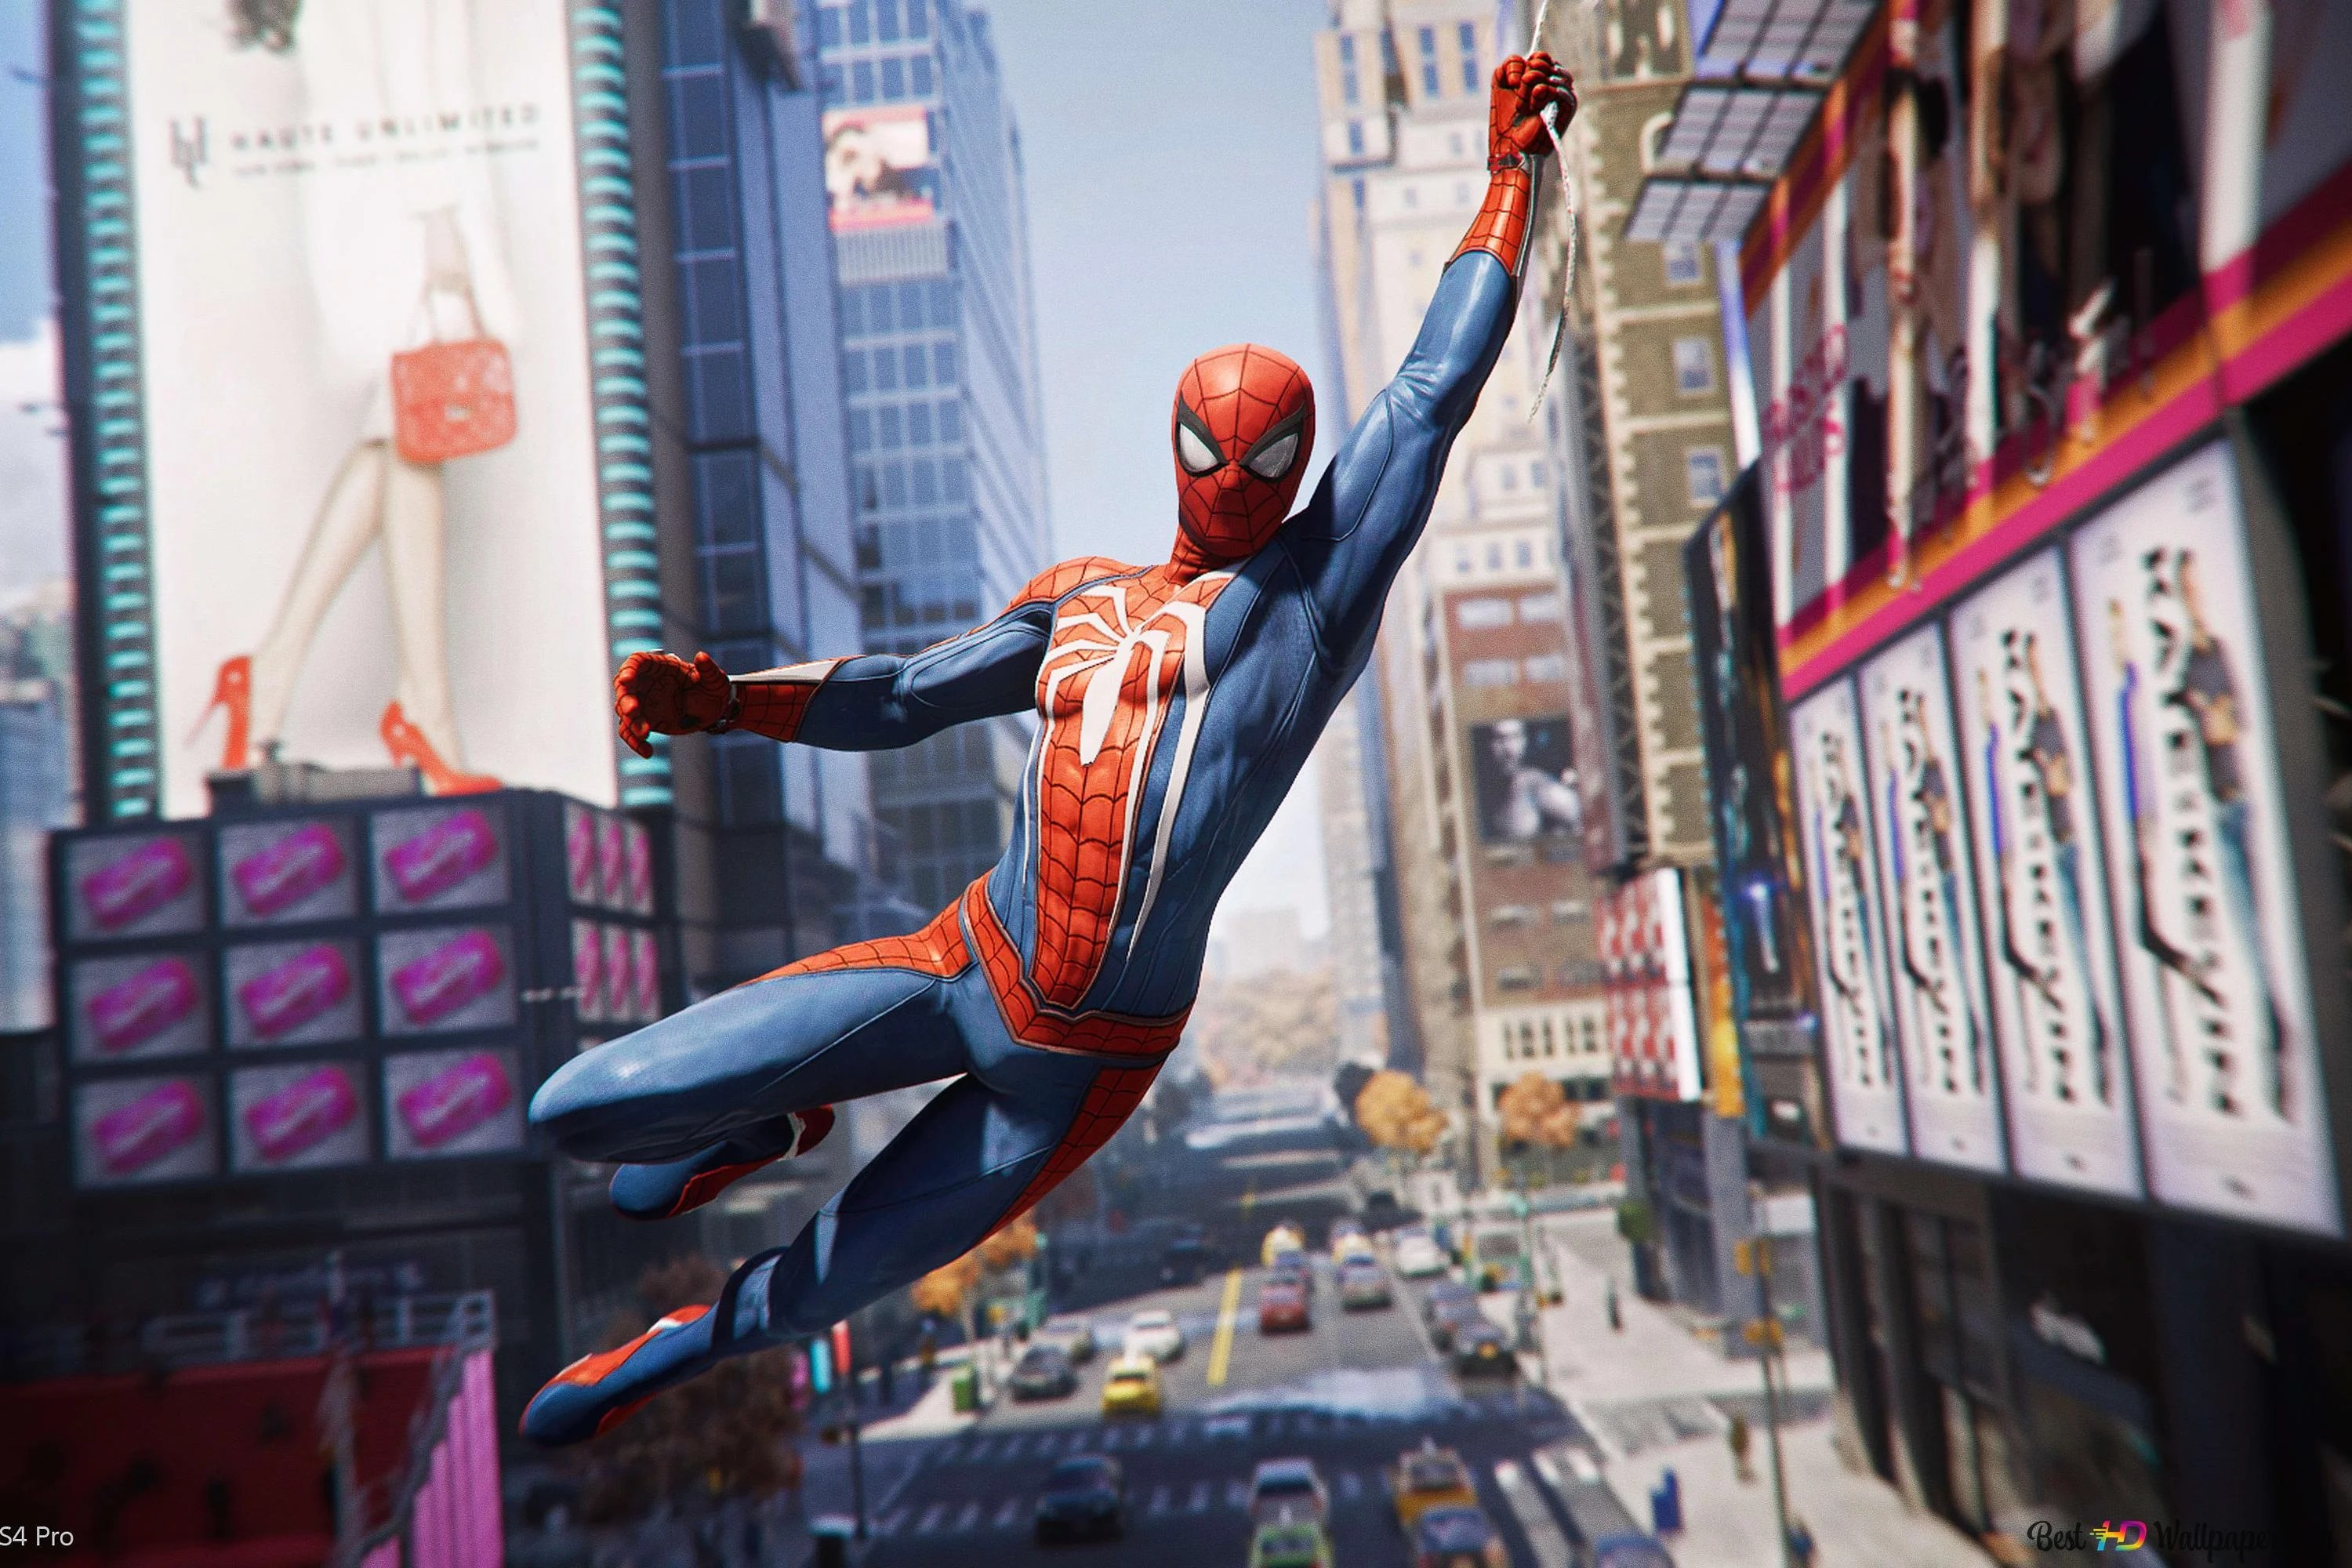 The developers of Marvel's Spider-Man 2 showed two new costumes